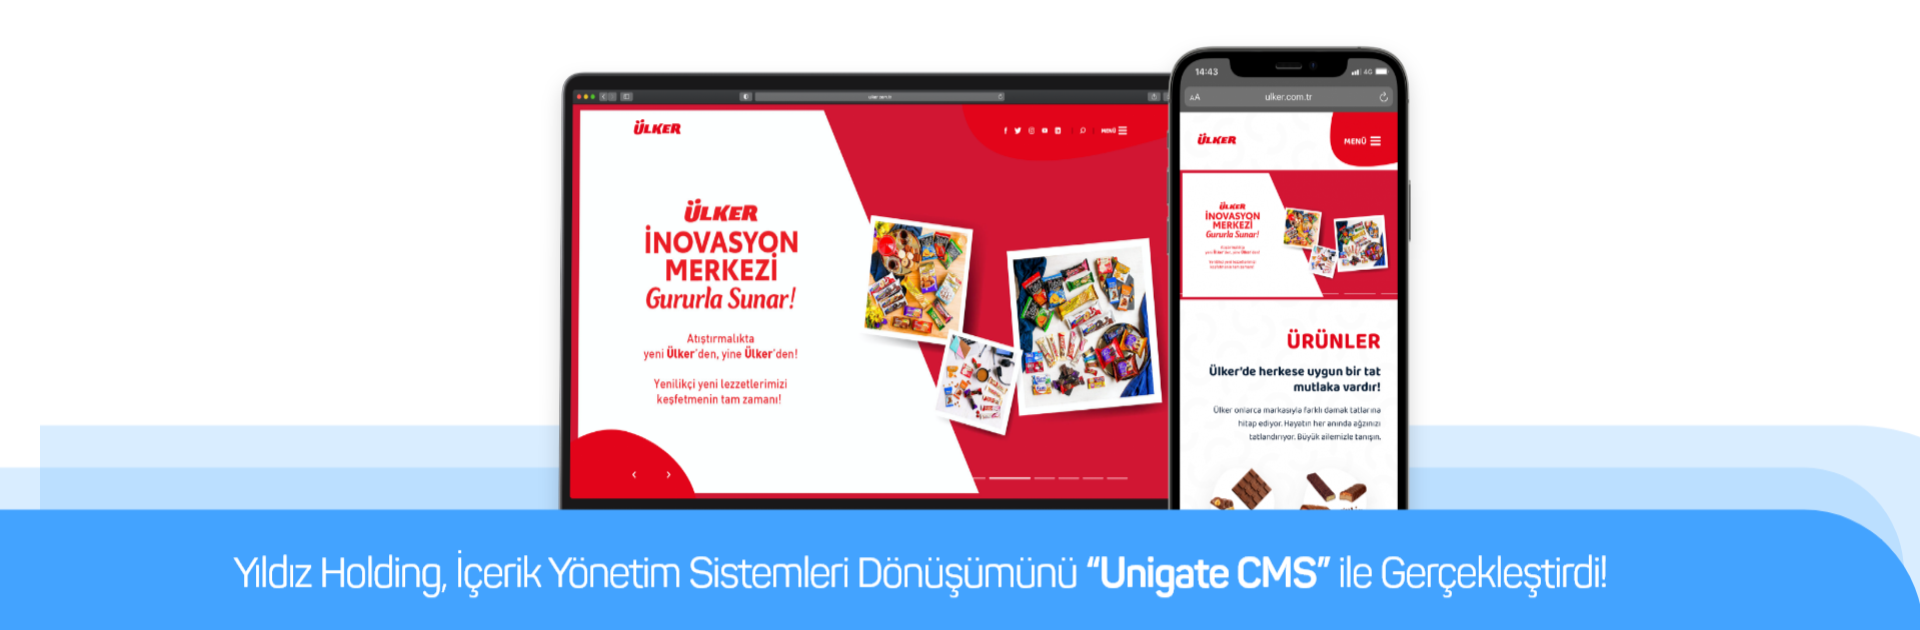 Yıldız Holding Realized its Content Management Systems Transformation with “Unigate CMS